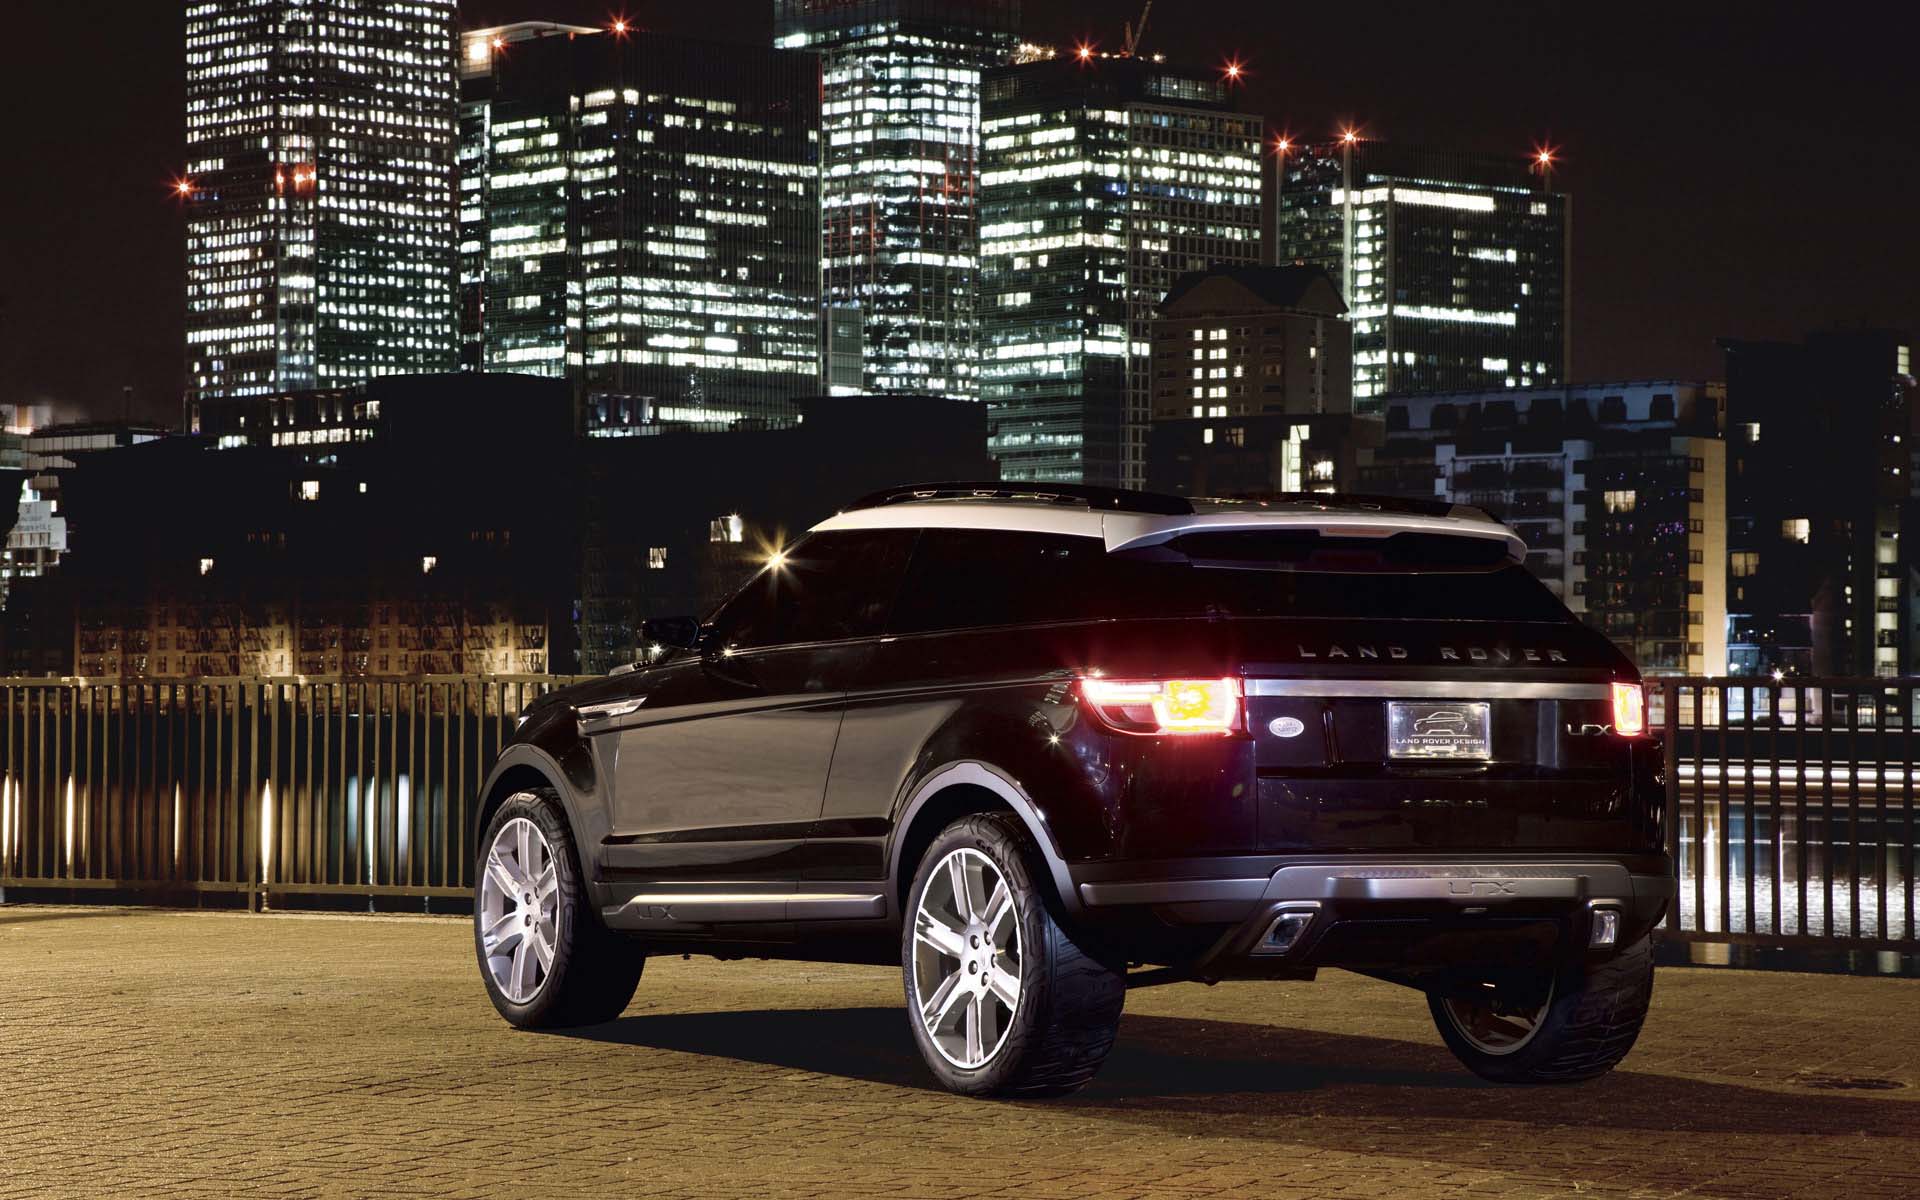 Vehicles Land Rover HD Wallpaper | Background Image